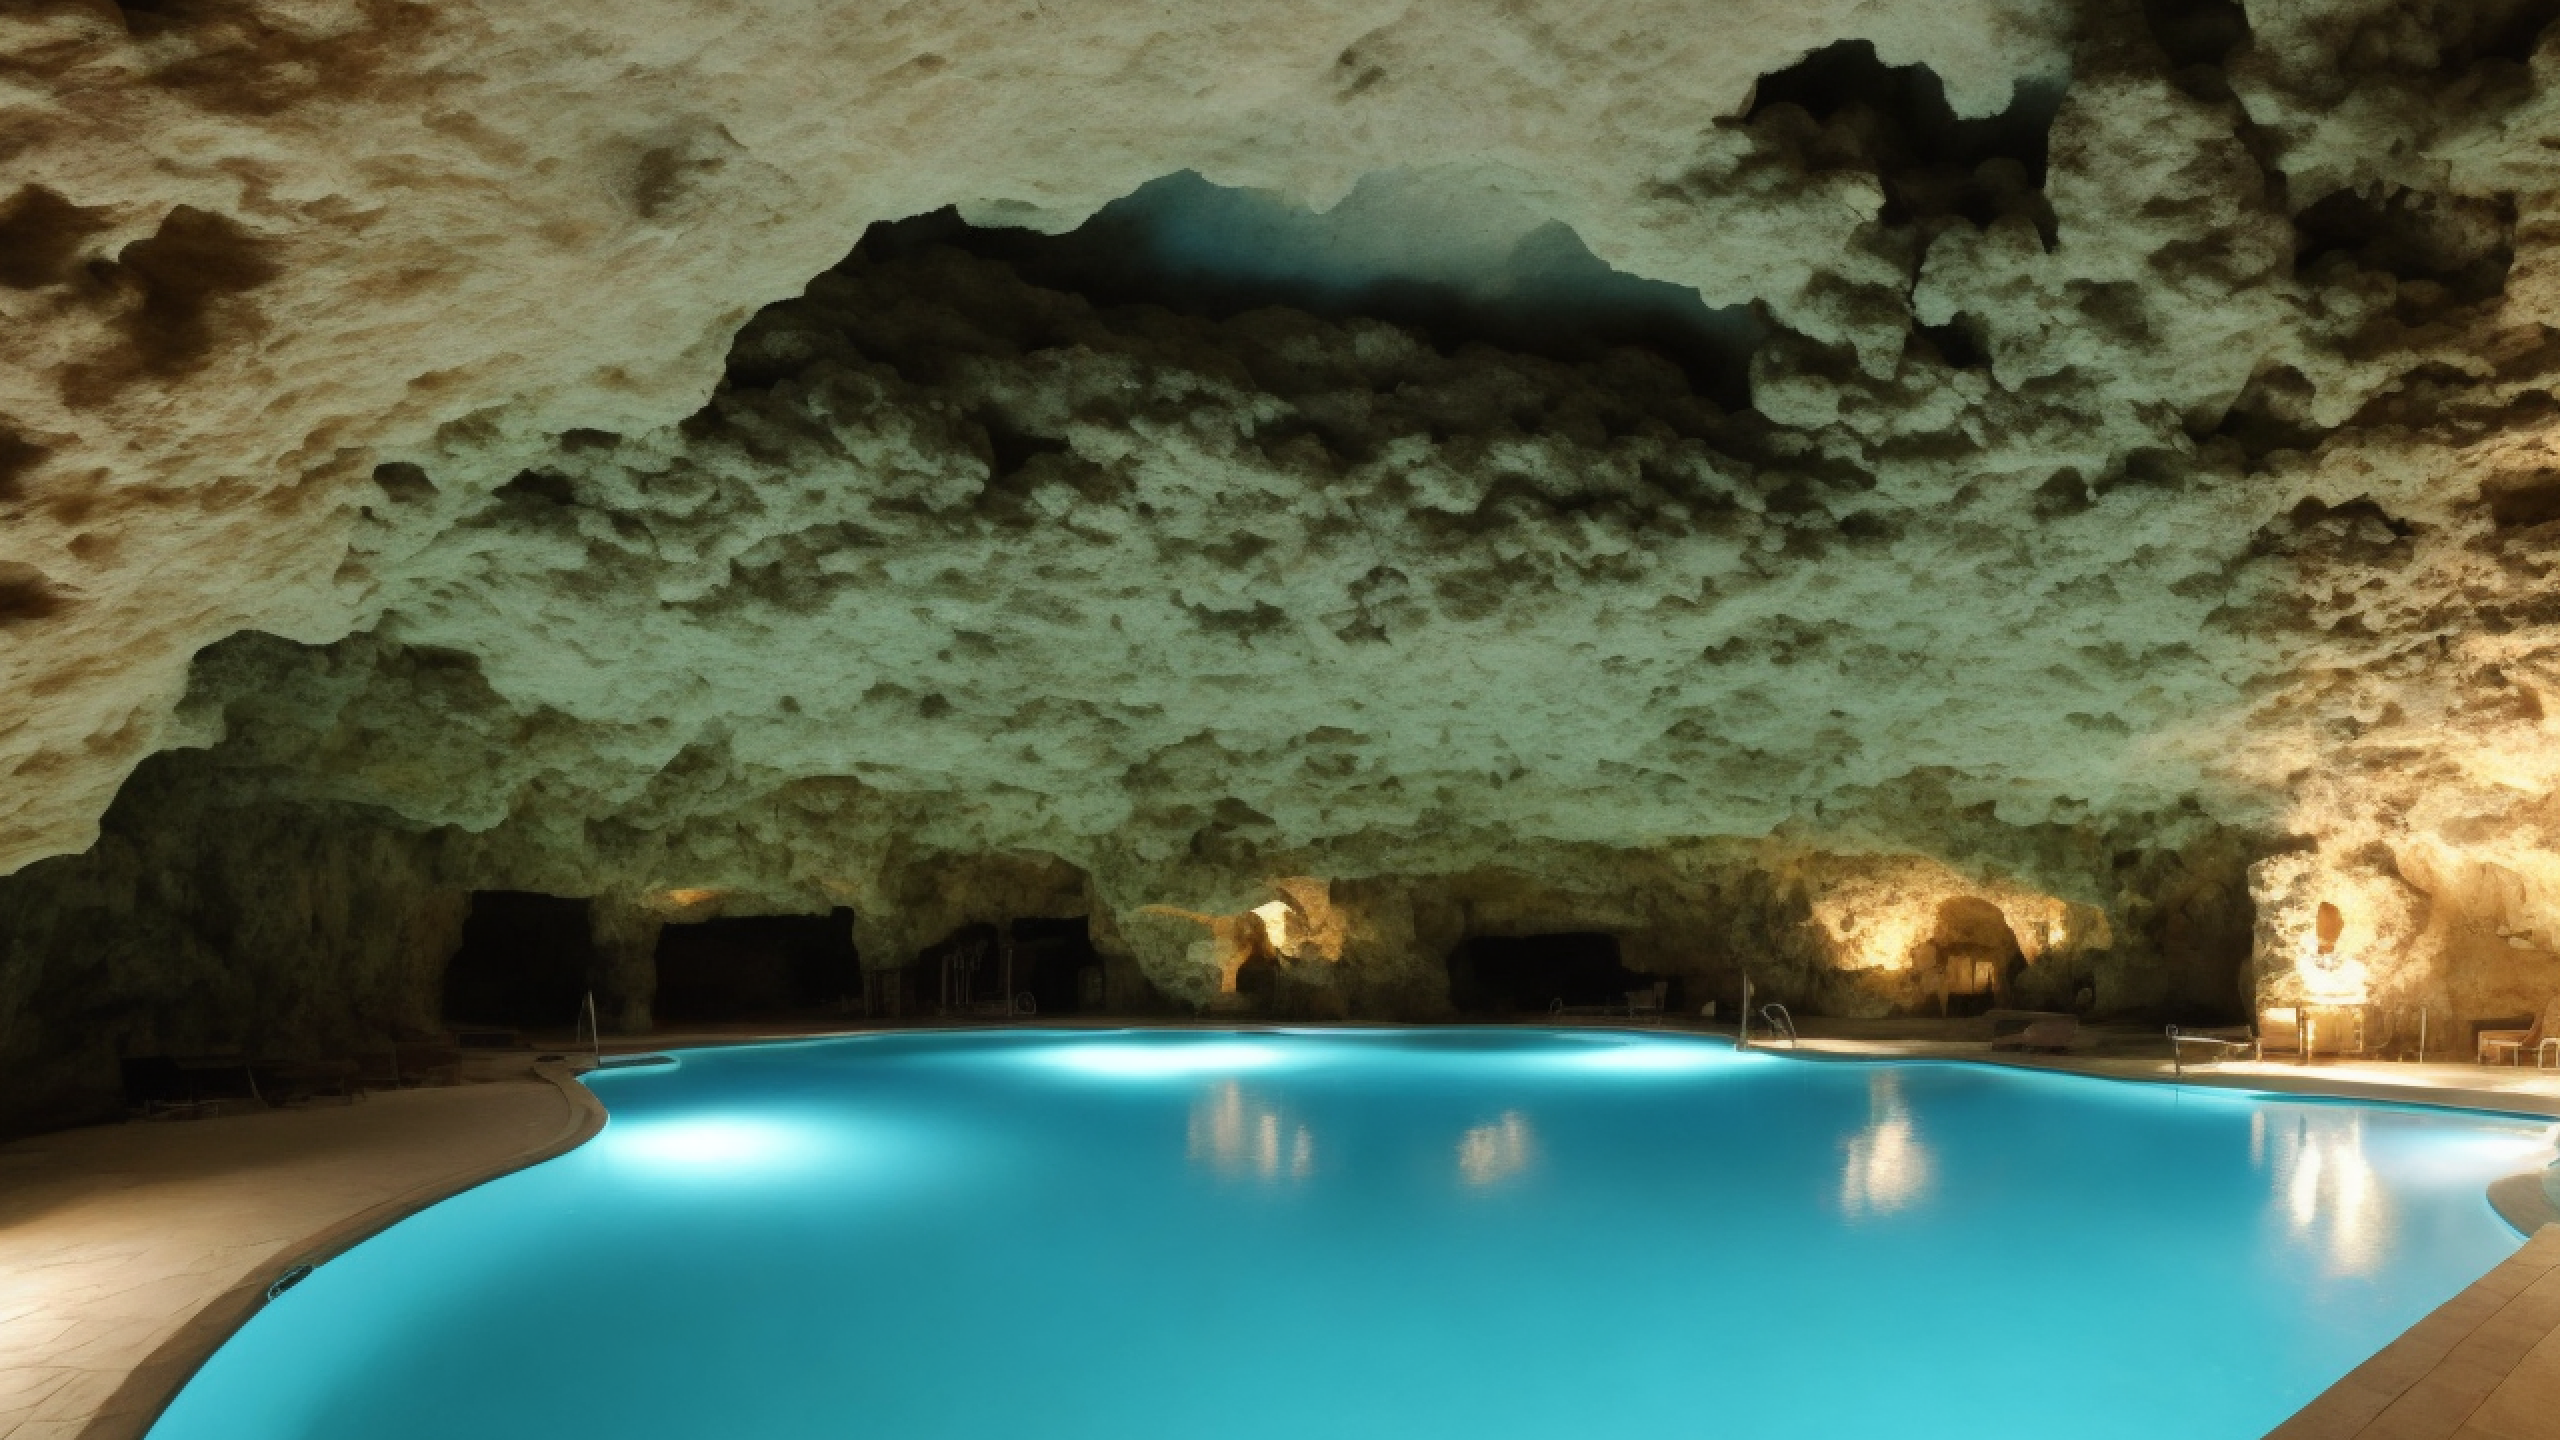 A natural cave with a pool